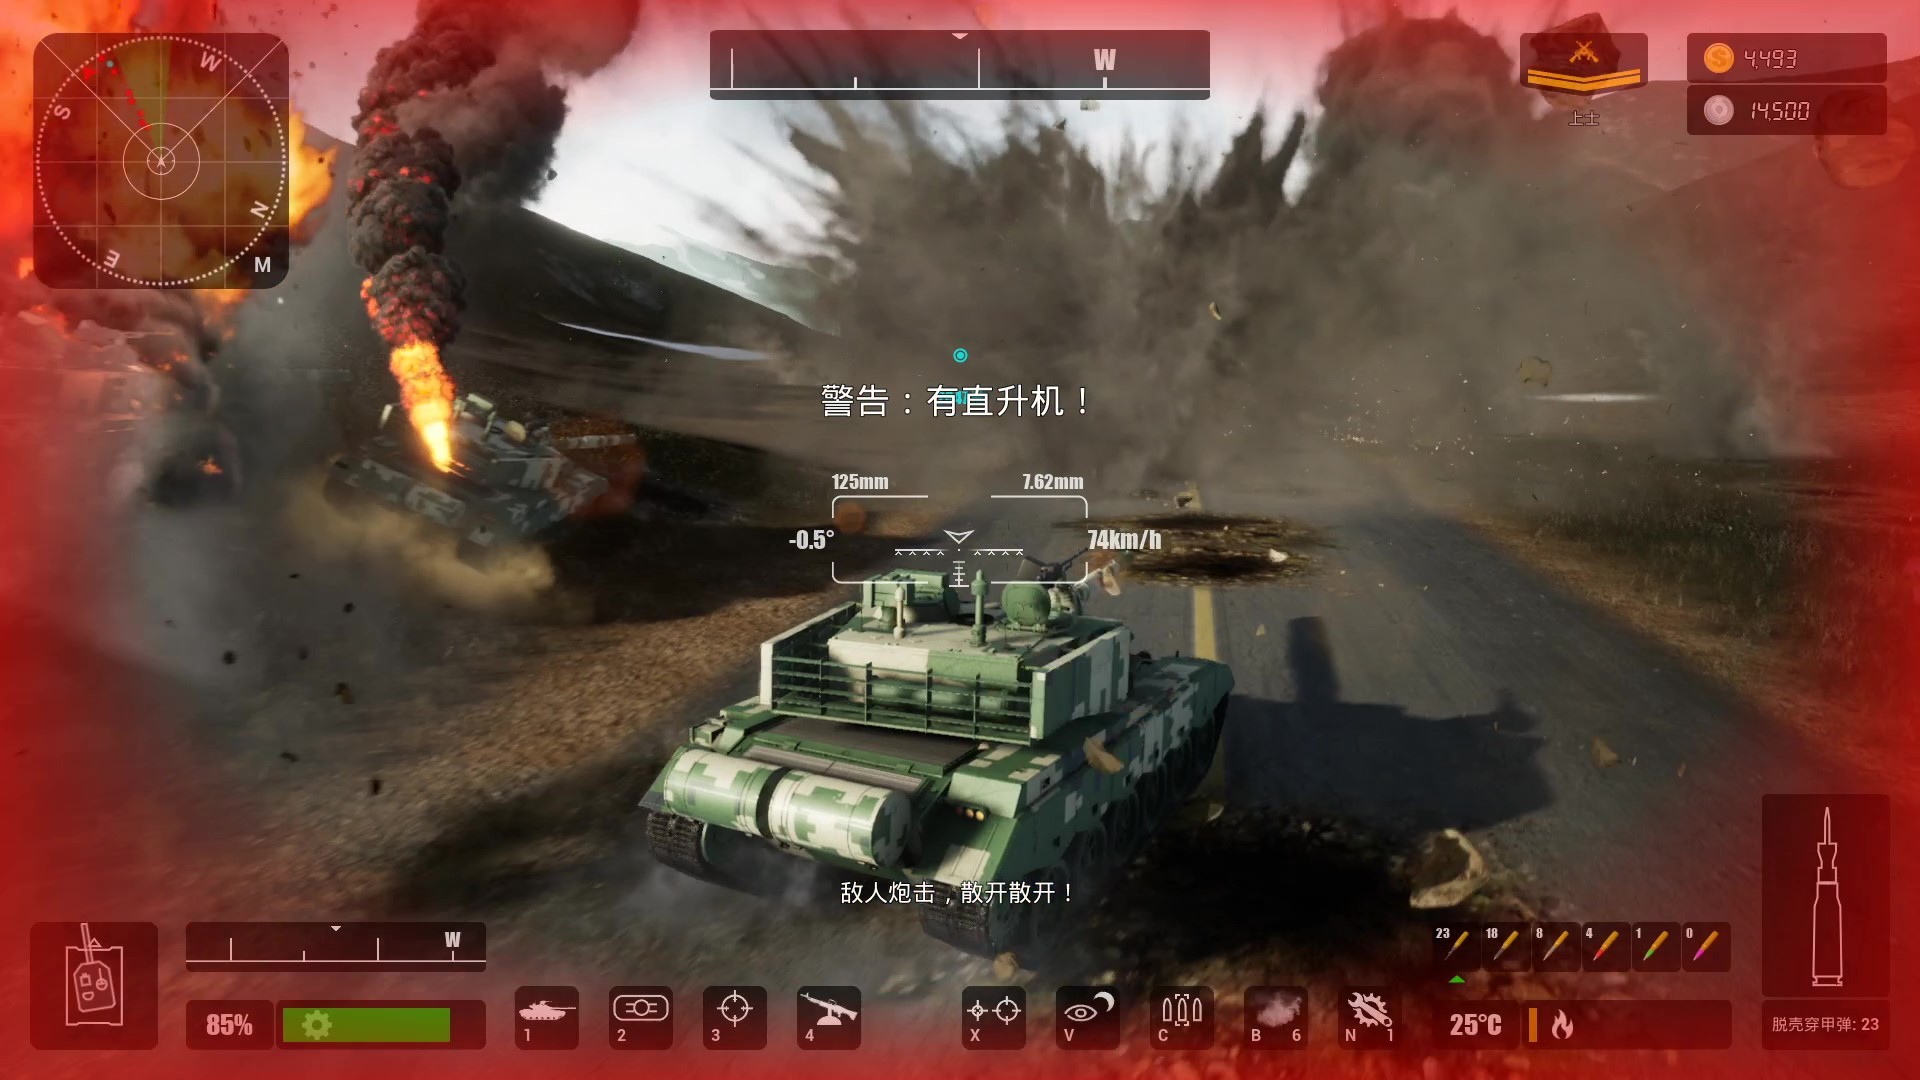 Armored Company of Heroes Free Download